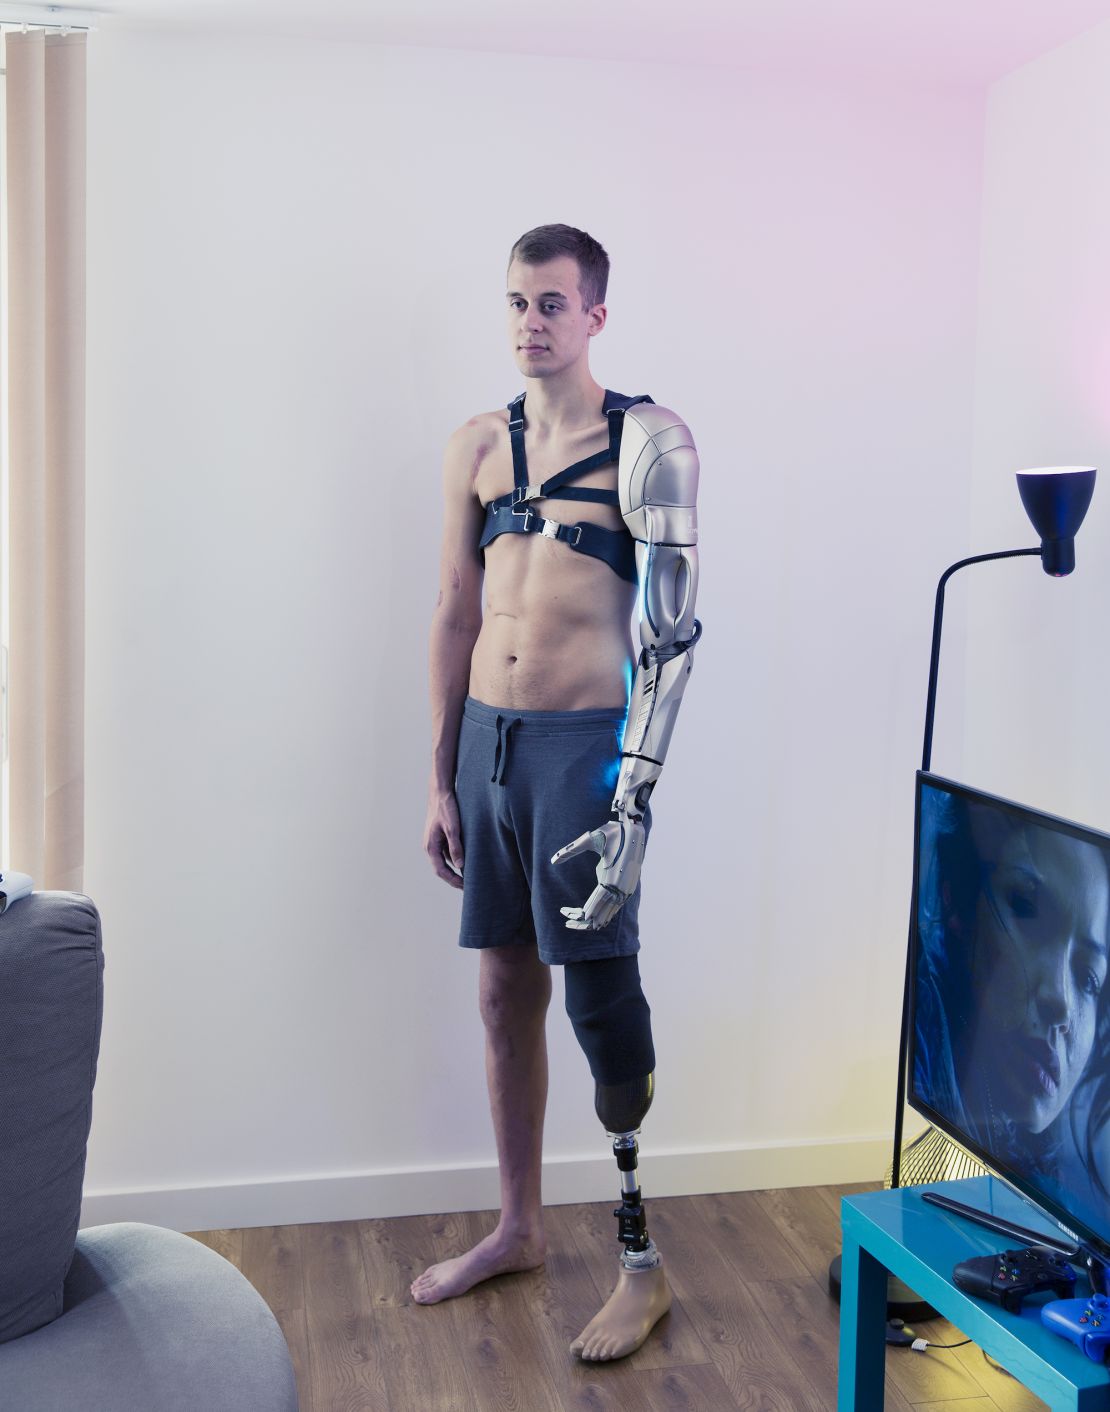 James Young has always been drawn to the aesthetics of science fiction. Following his accident, he came to see "re-building" his body as part of his recovery process.